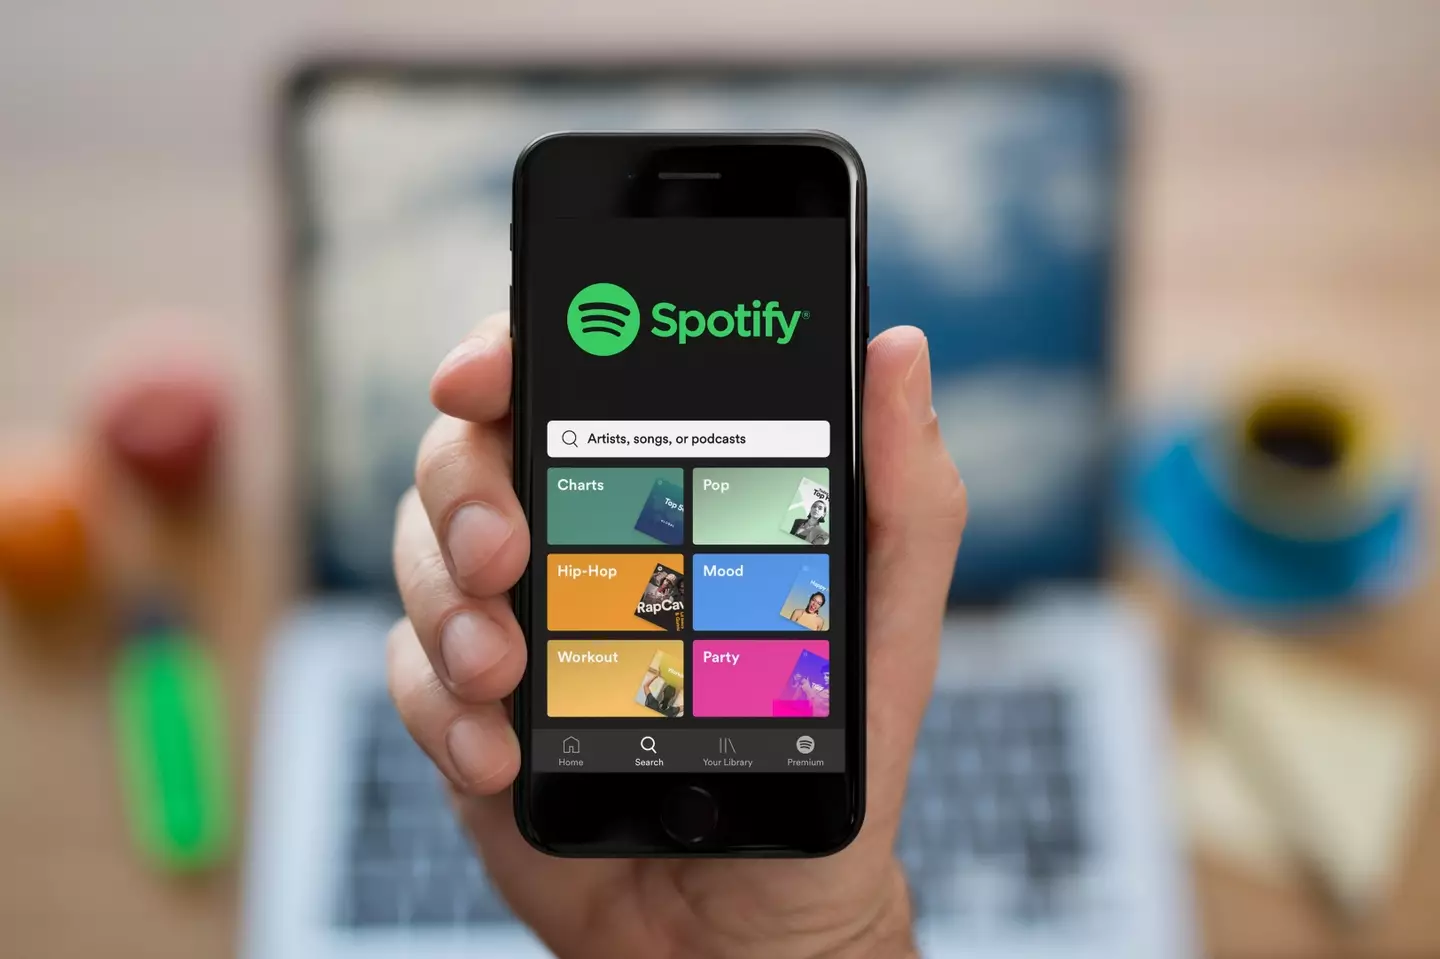 Your monthly Spotify subscription could help towards getting a mortgage.